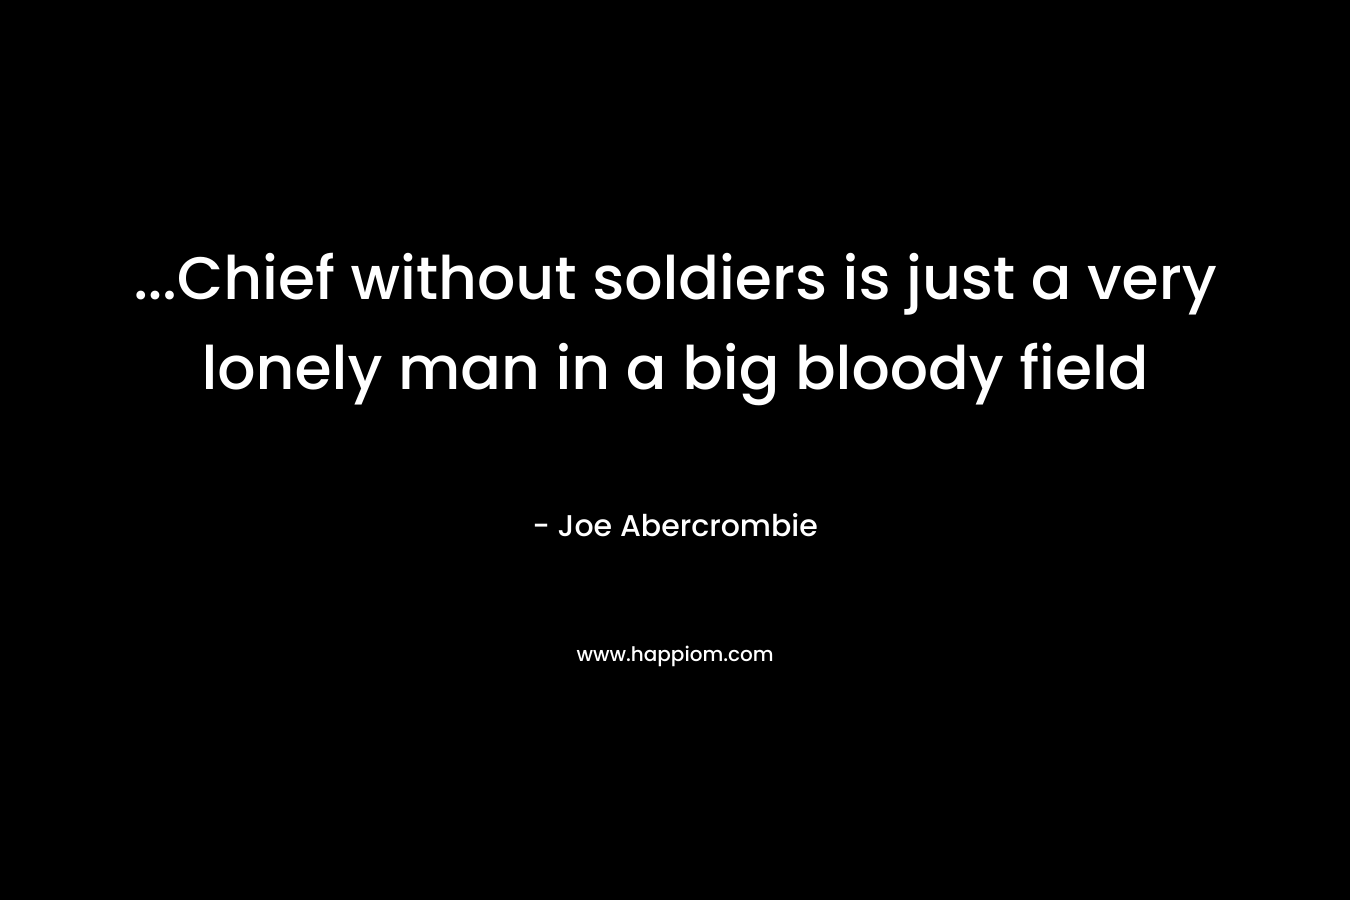 ...Chief without soldiers is just a very lonely man in a big bloody field